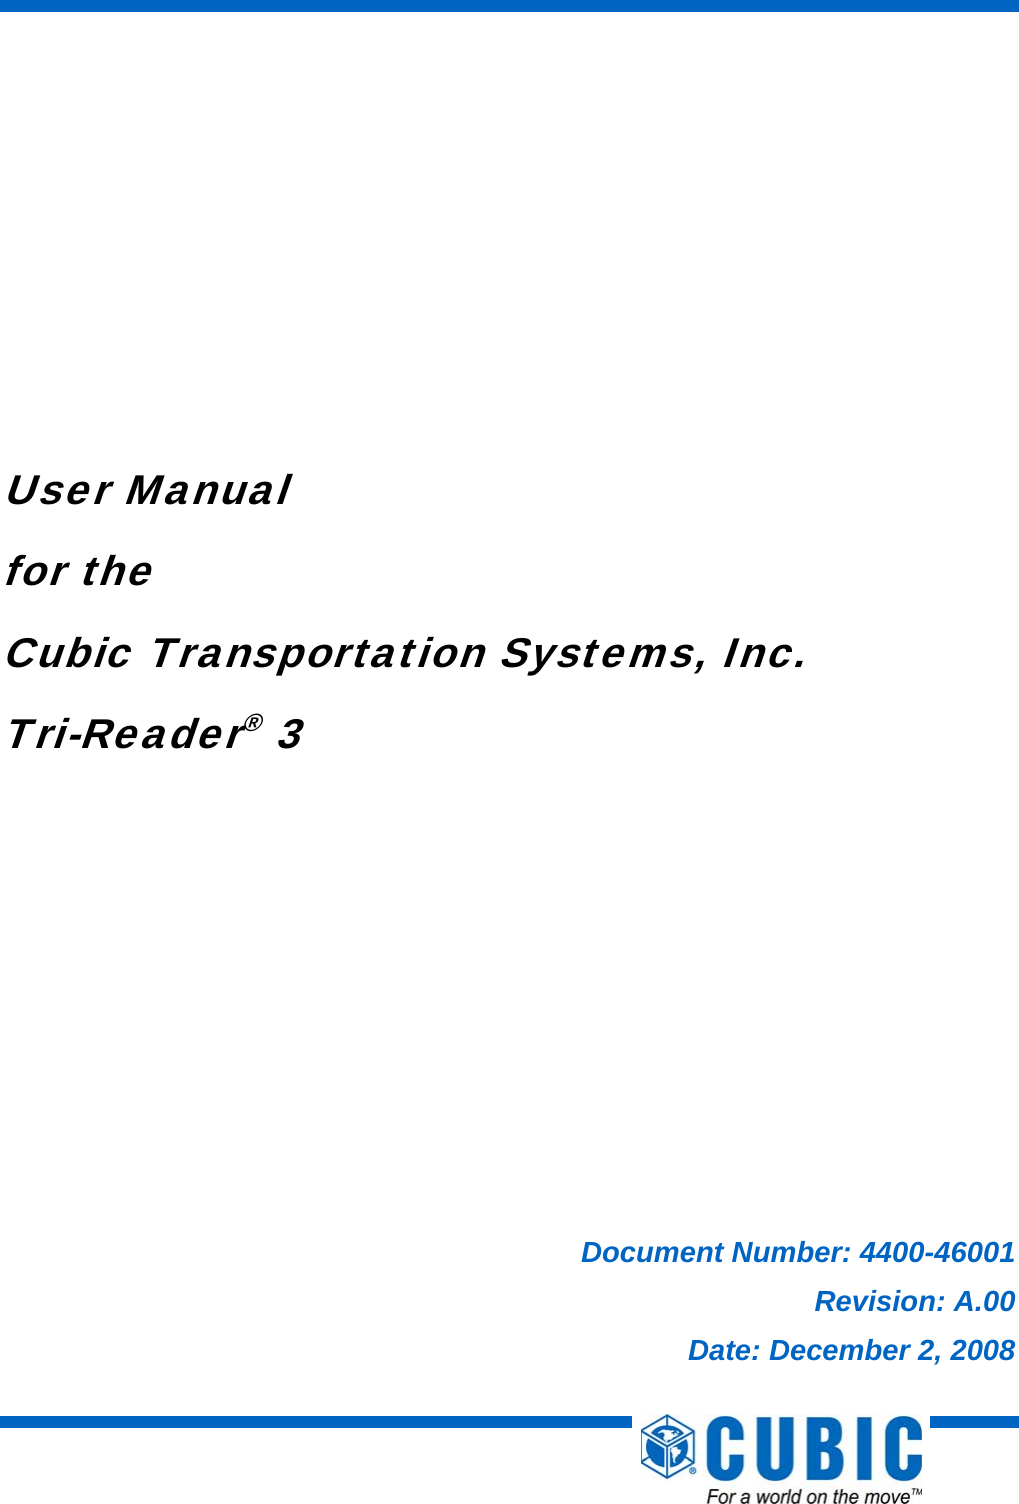      User Manual for the Cubic Transportation Systems, Inc. Tri-Reader® 3           Document Number: 4400-46001 Revision: A.00 Date: December 2, 2008 